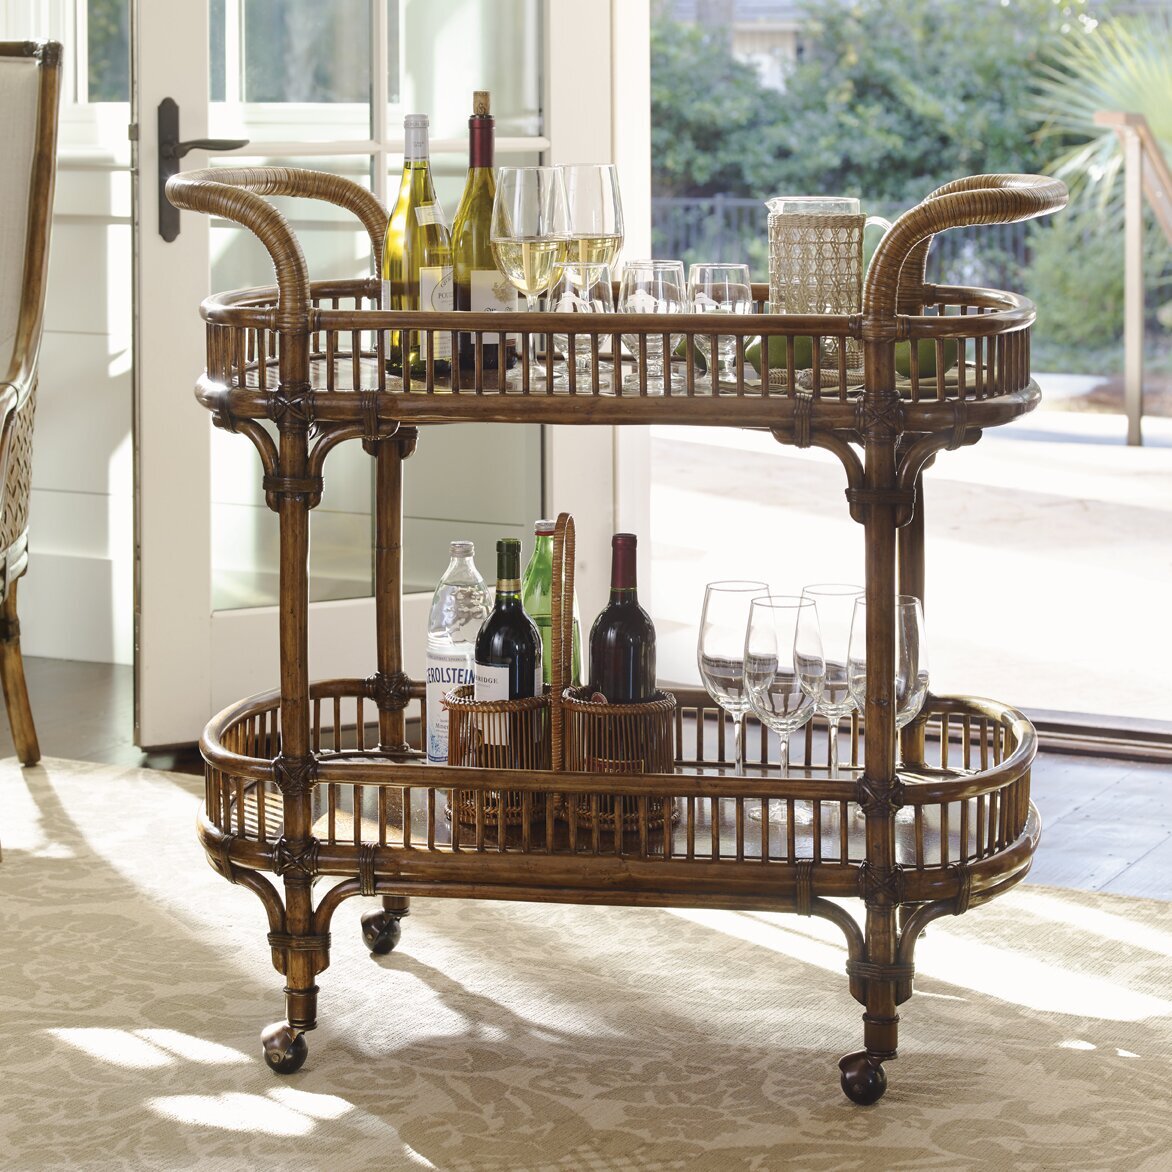 Rattan serving cart in antique style